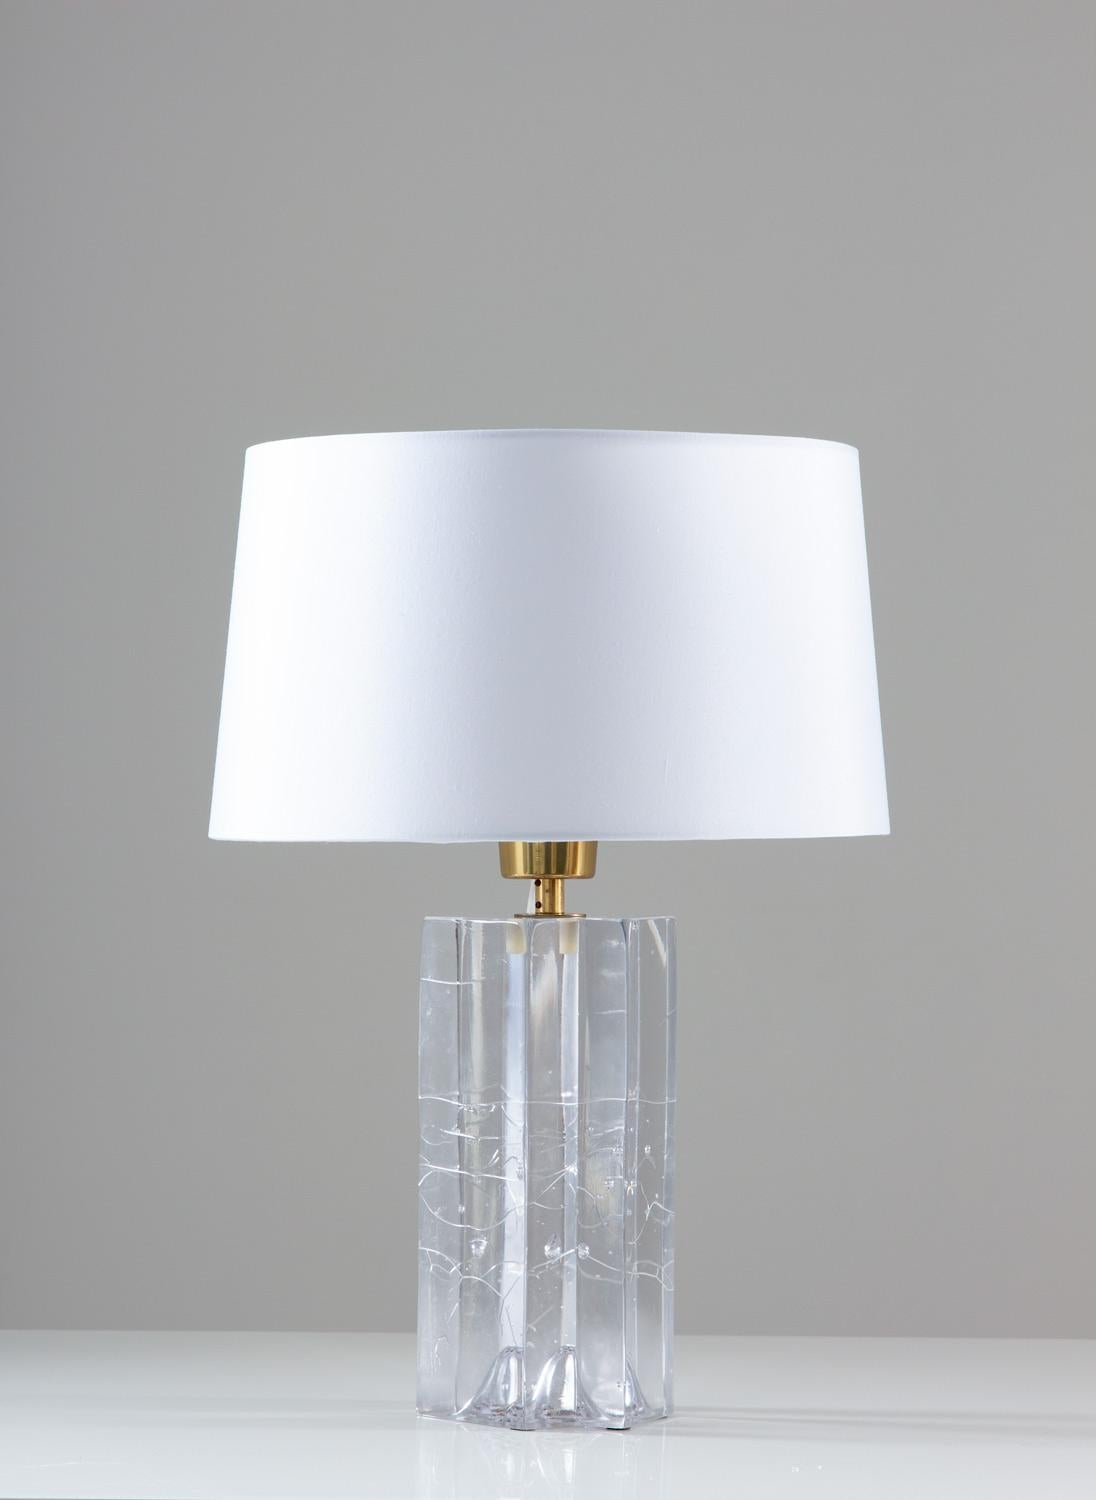 A pair of impressive table lamps in glass model 